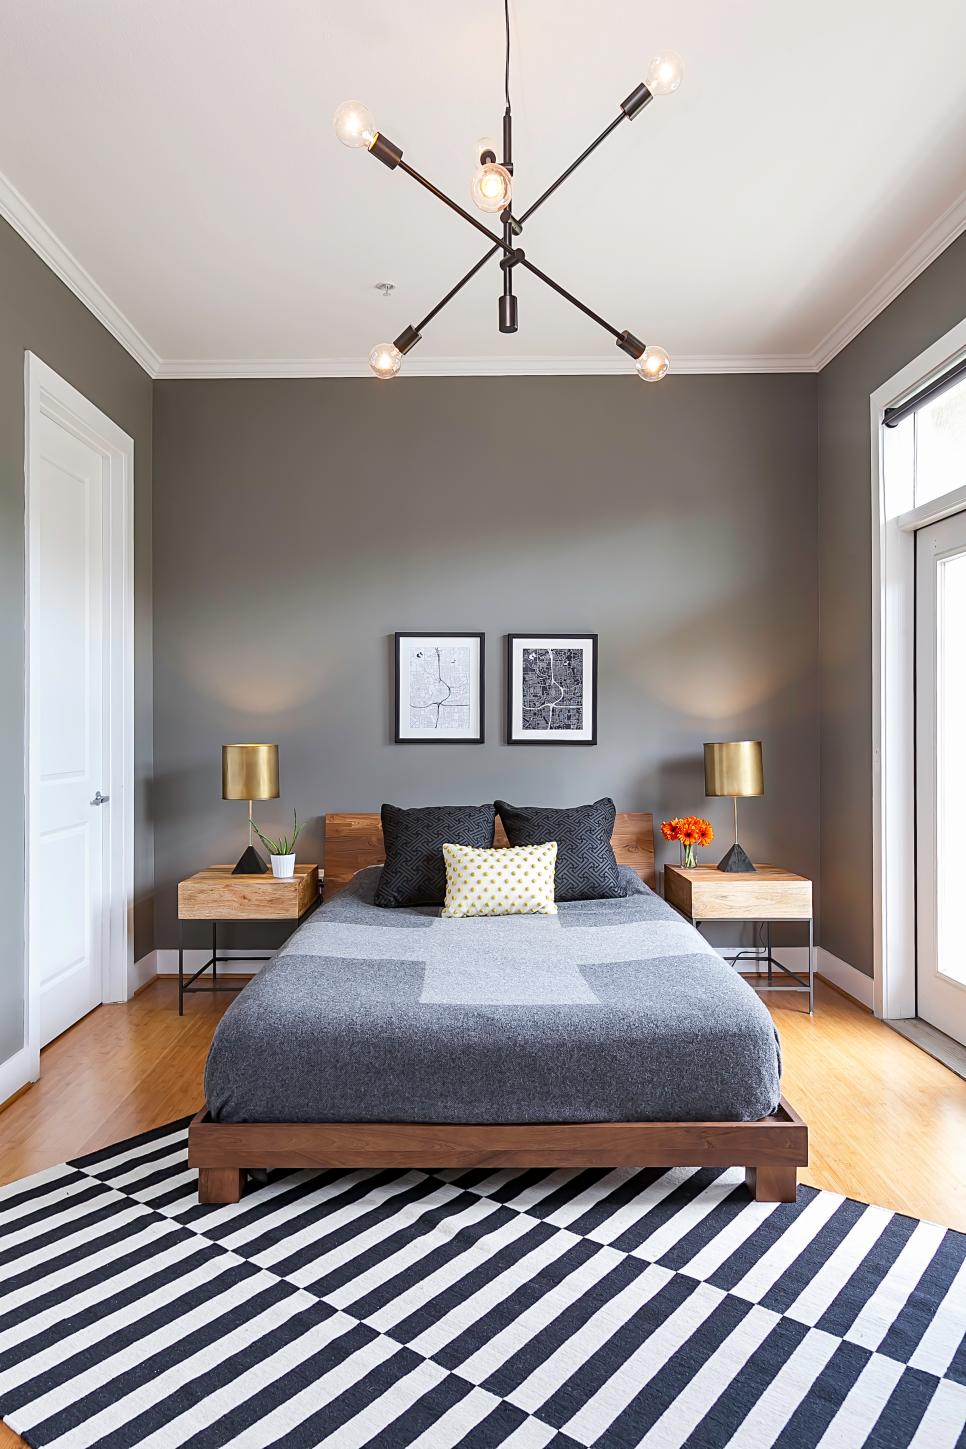 Gray Paint in Master Bedroom Creates Soothing, Masculine